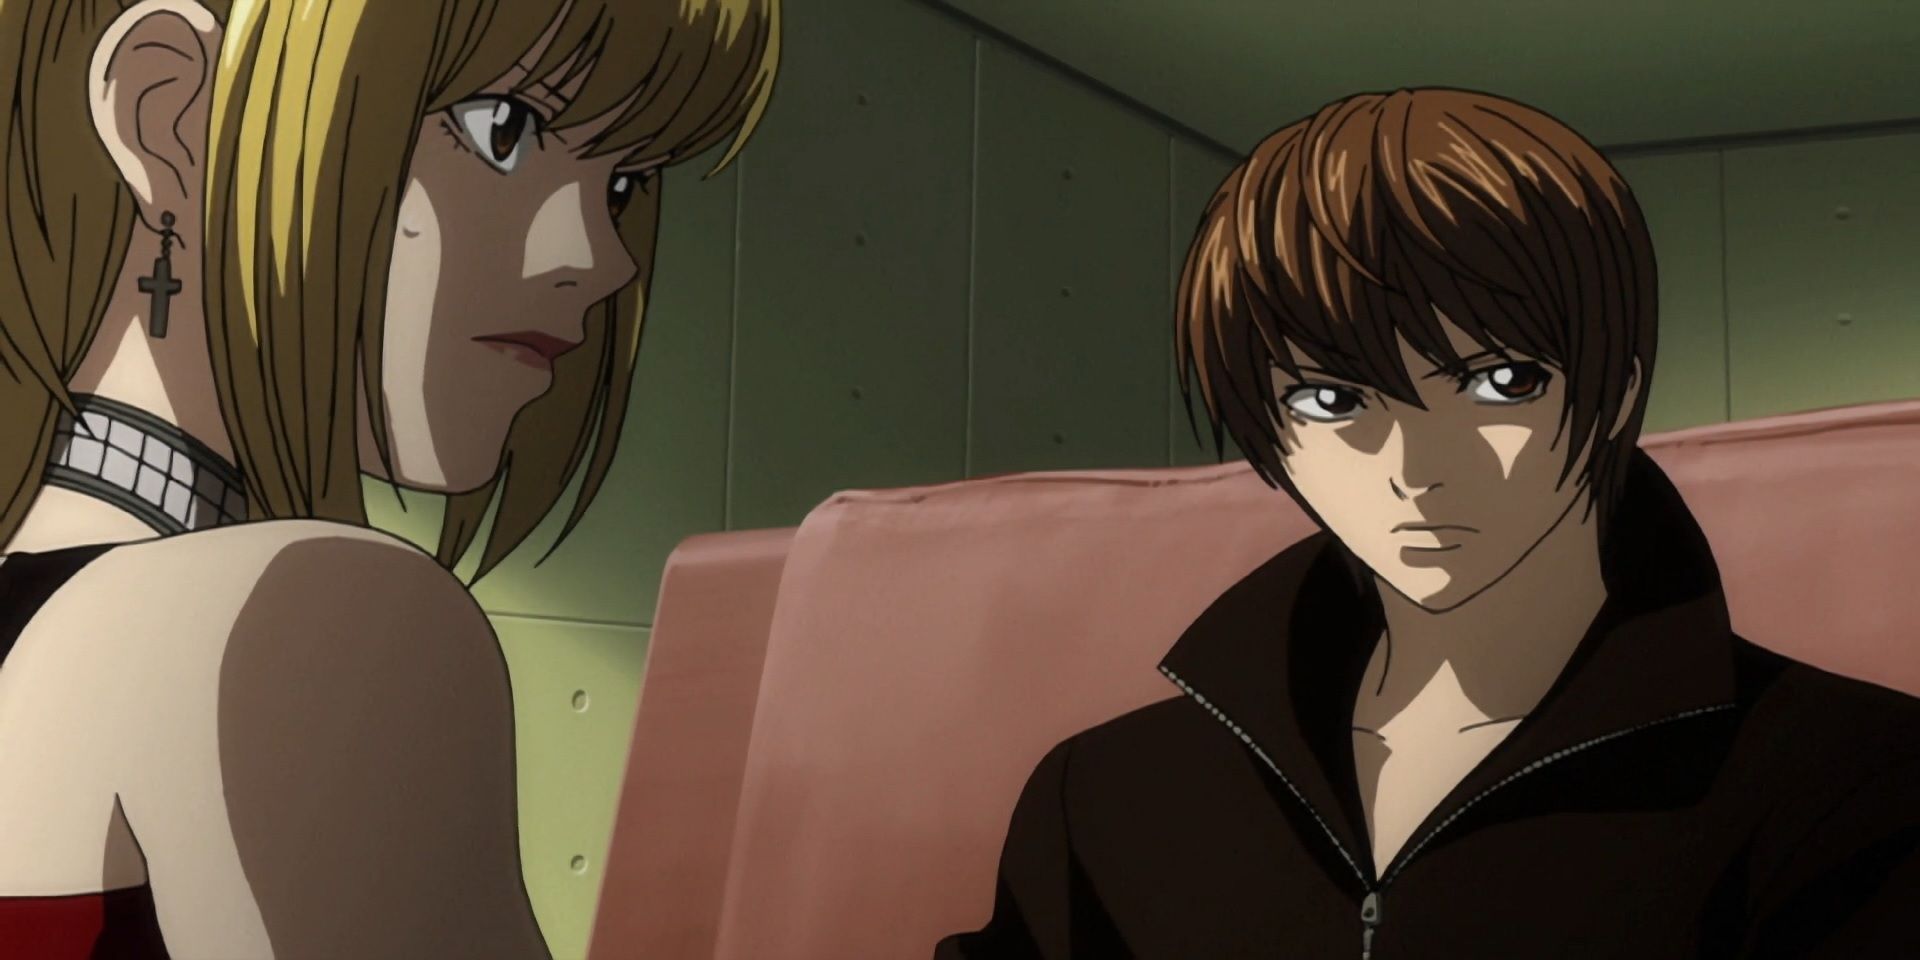 Death Note: 5 Reasons We Love (& Hate) Light Yagami